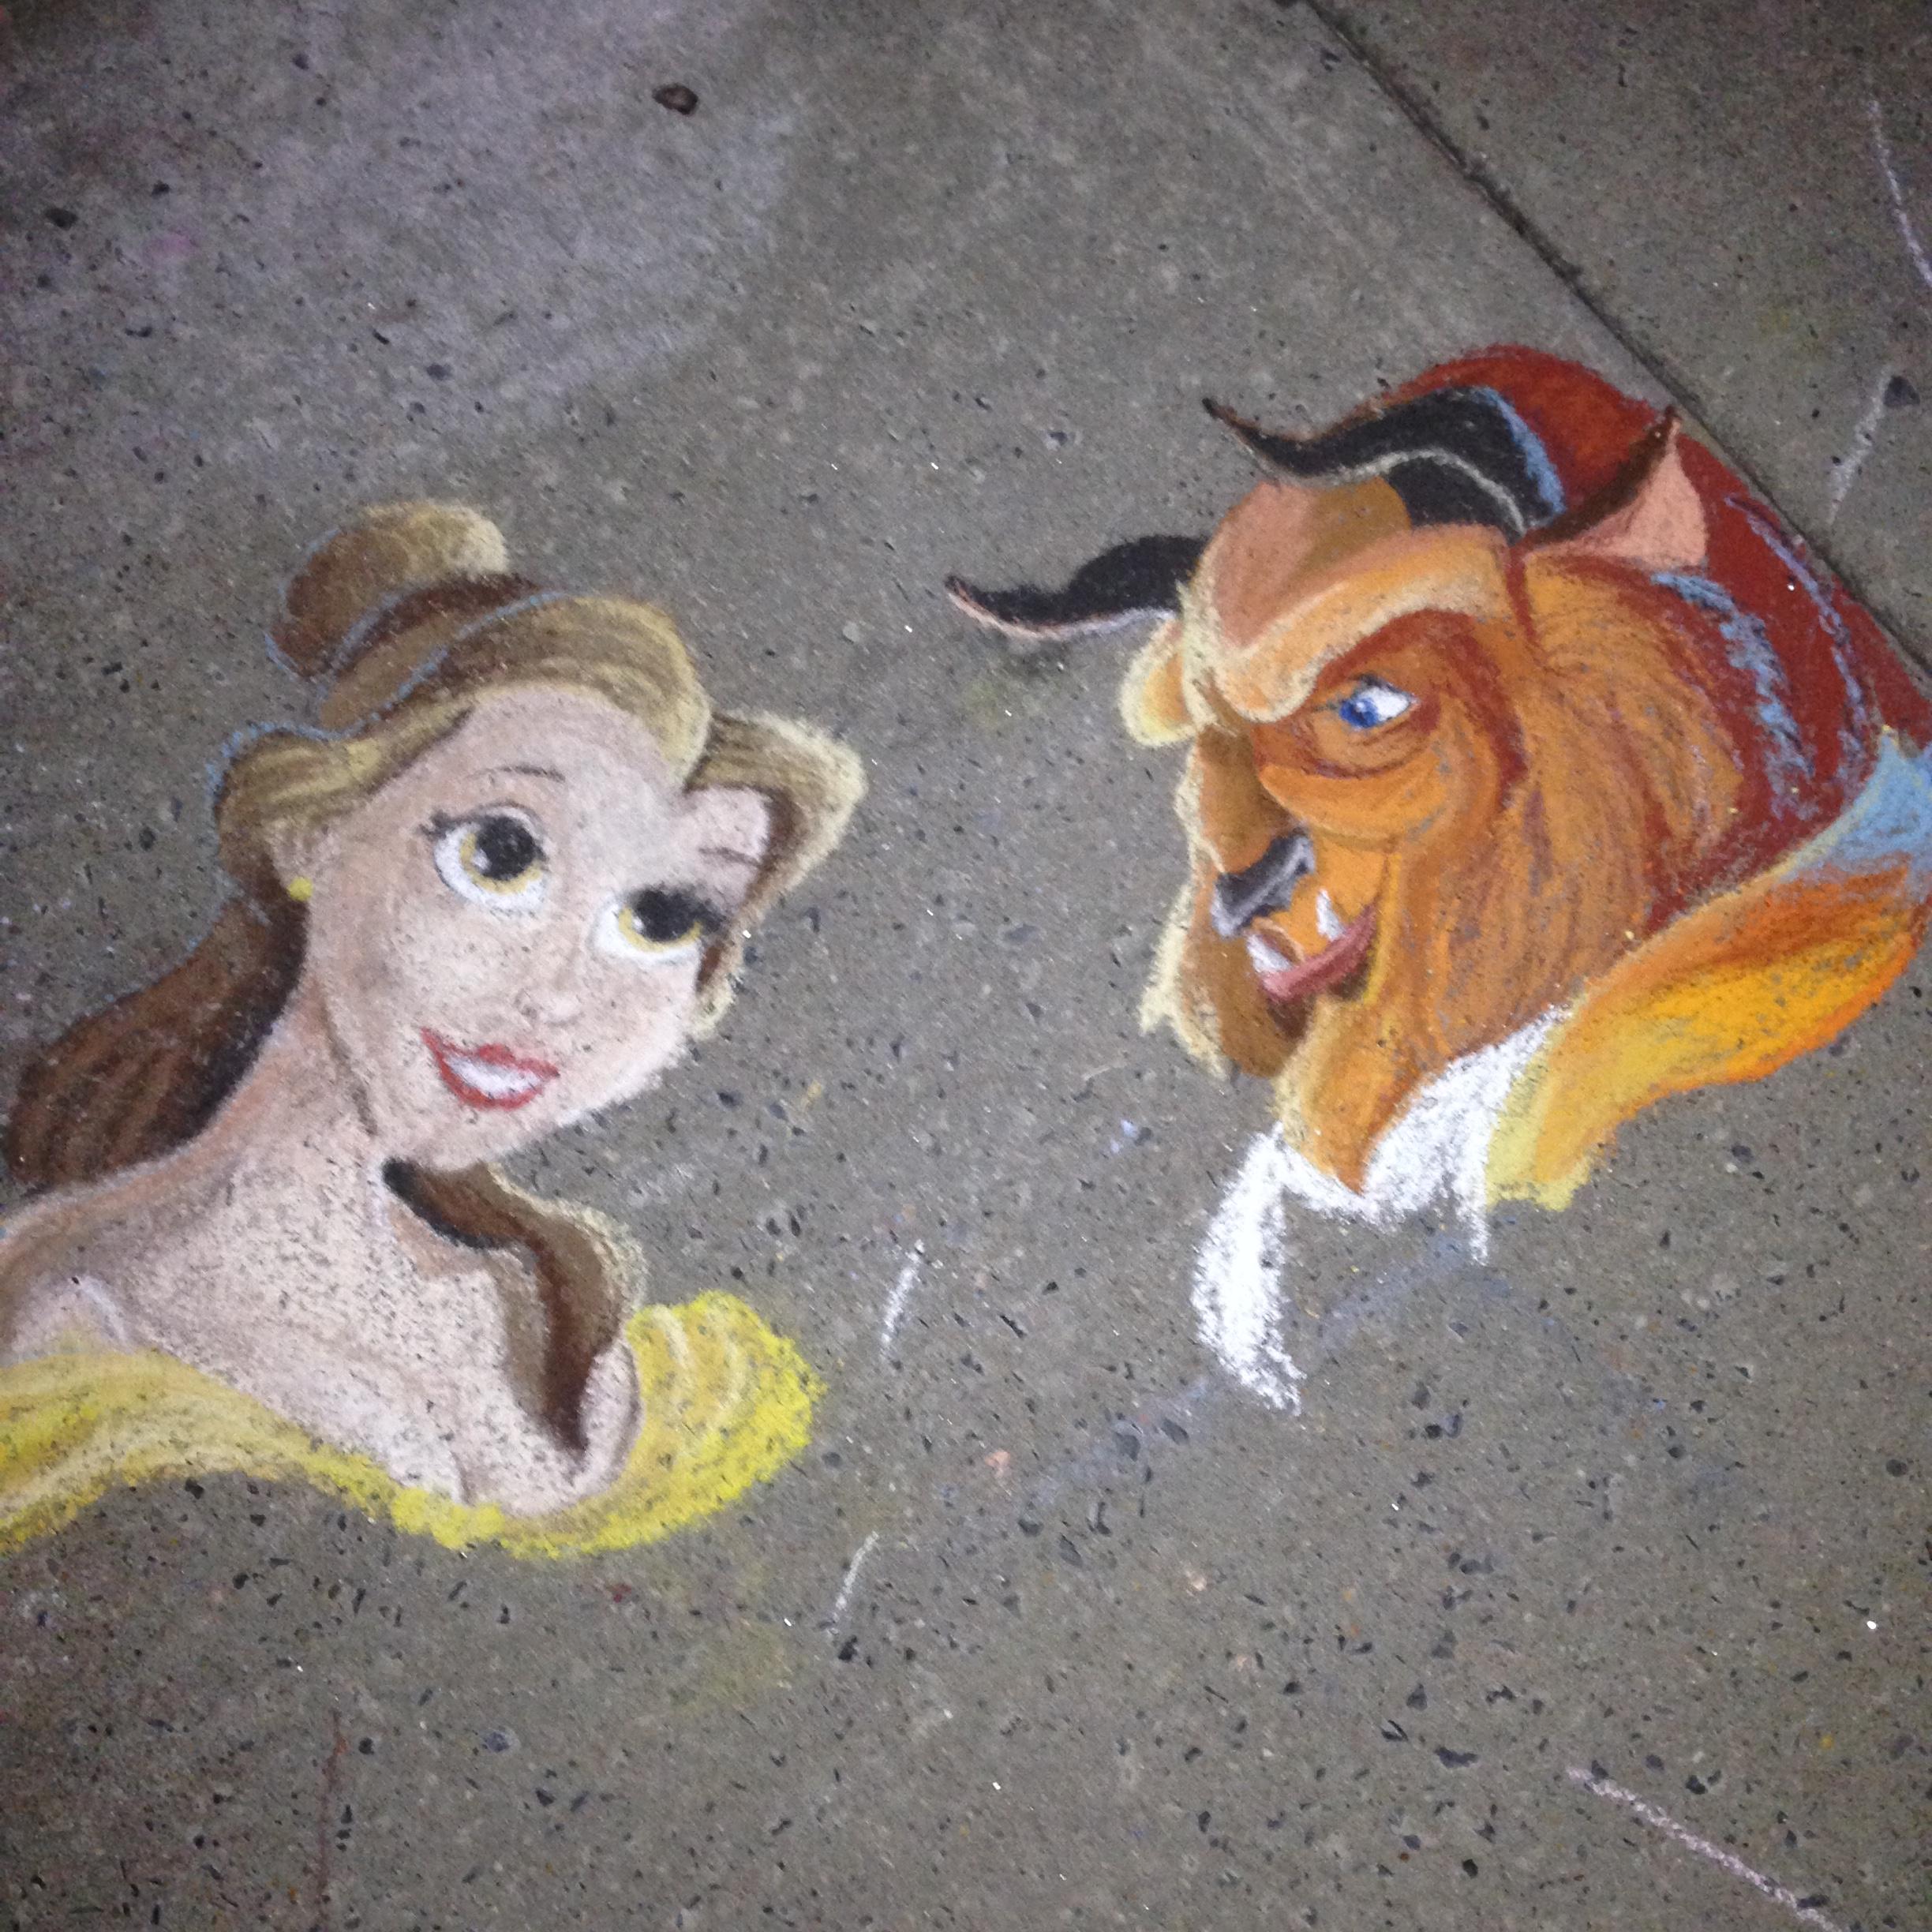 Talented Girl Shows Off Her Awesome Chalk Art!